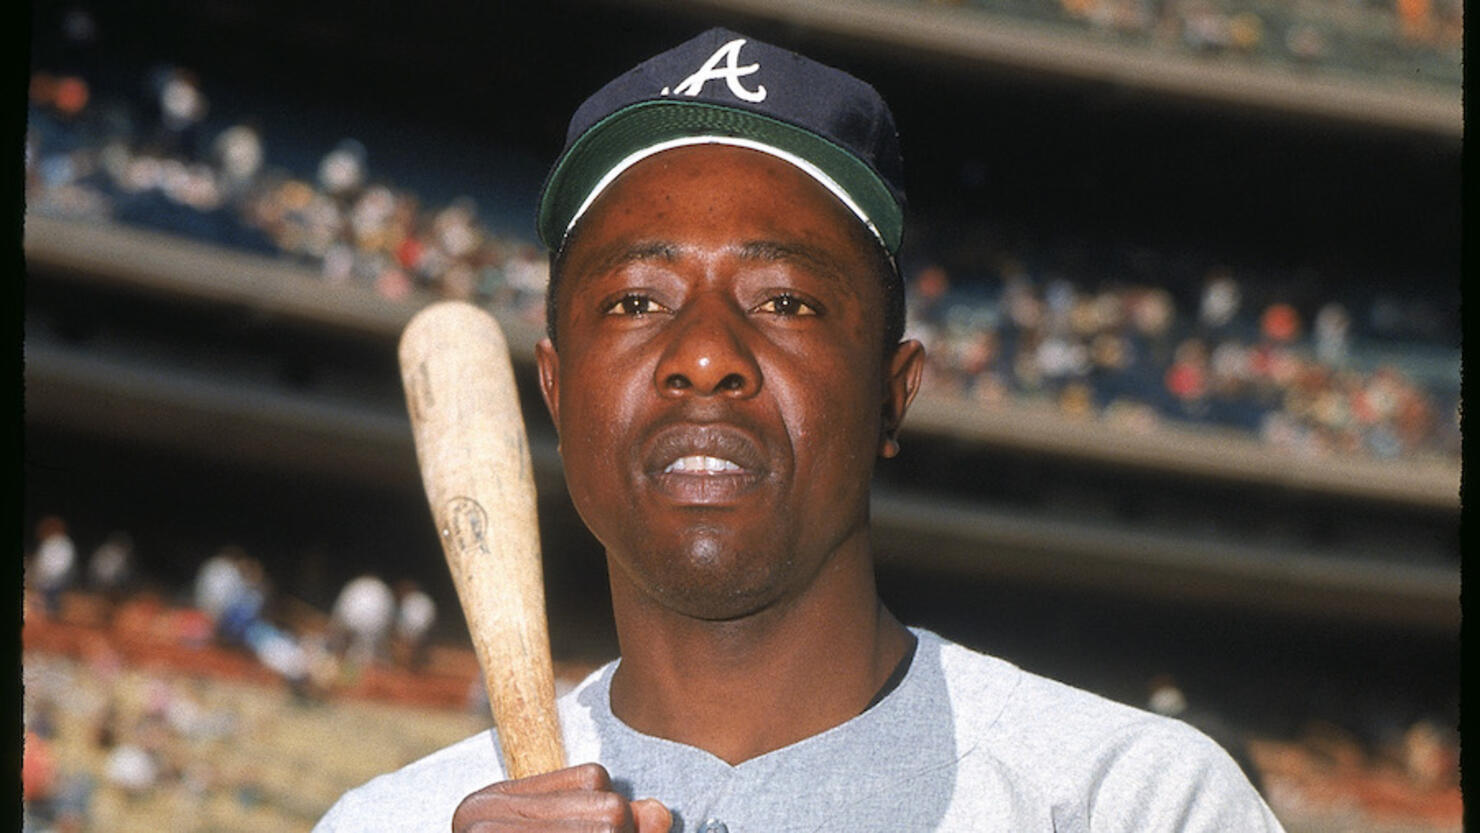 Hank Aaron Rookie Card Sells For Record-Setting Price